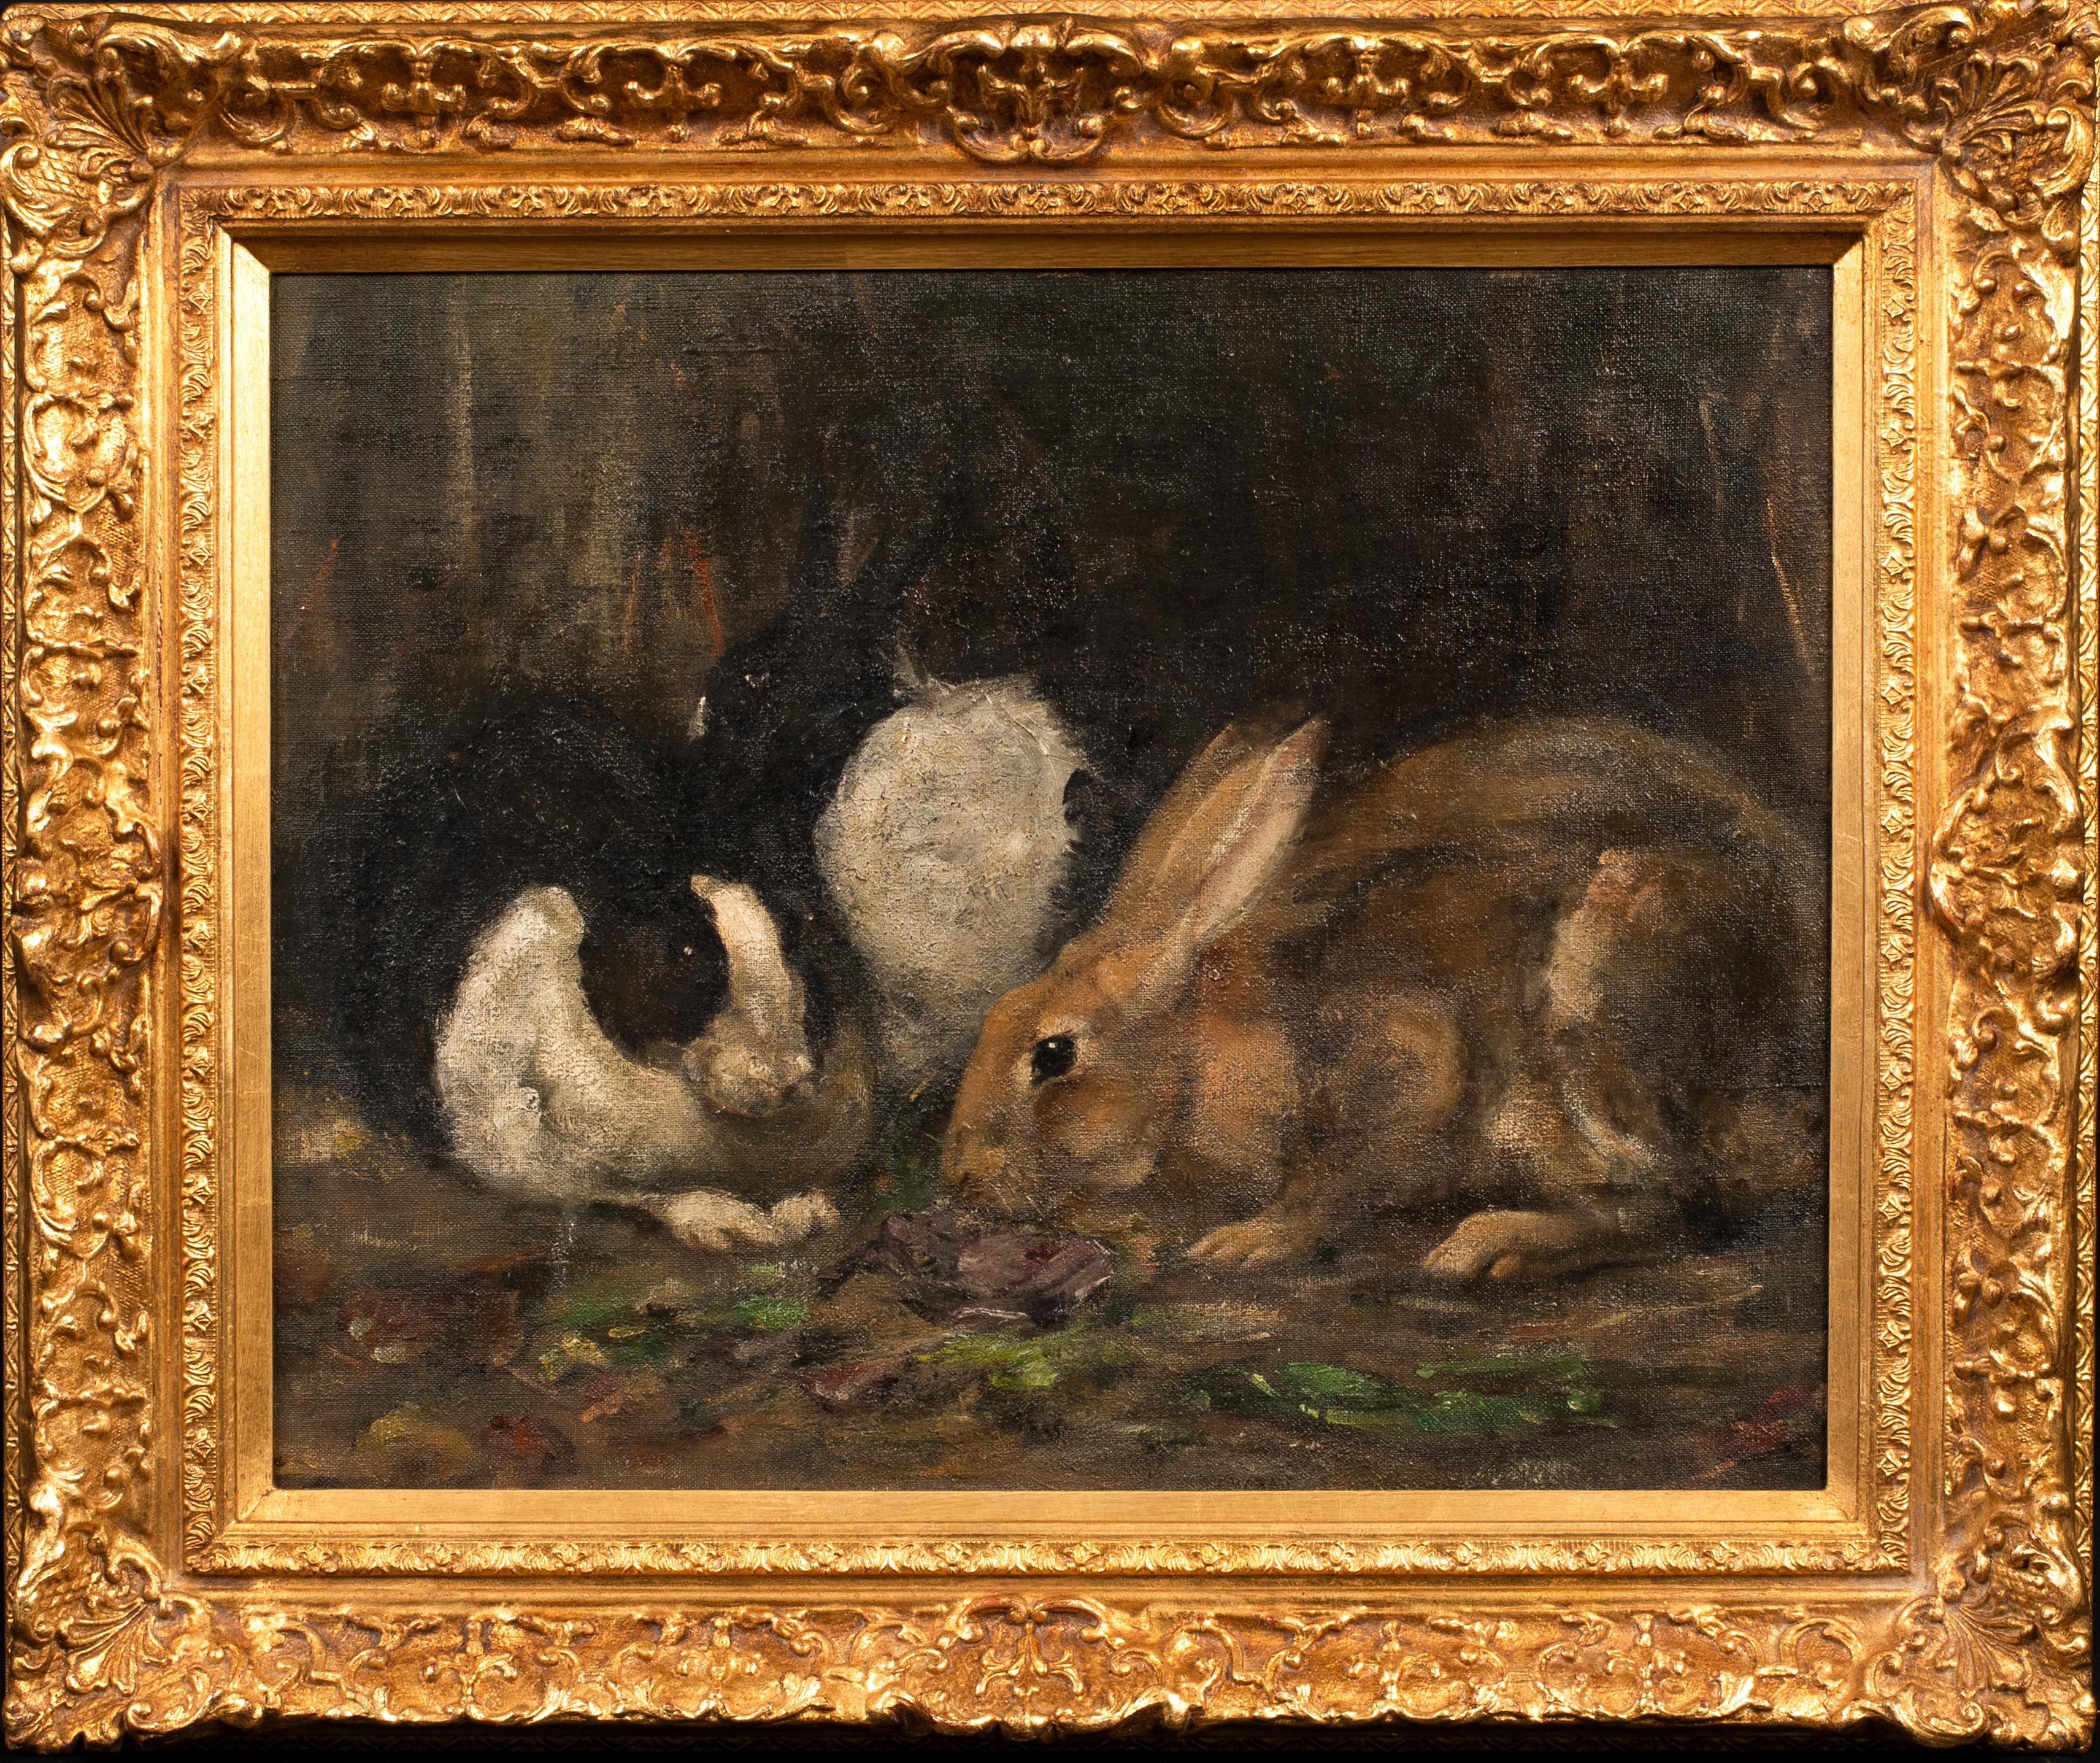 Study Of Rabbits Eating, early 20th century   English School - Black Portrait Painting by Unknown